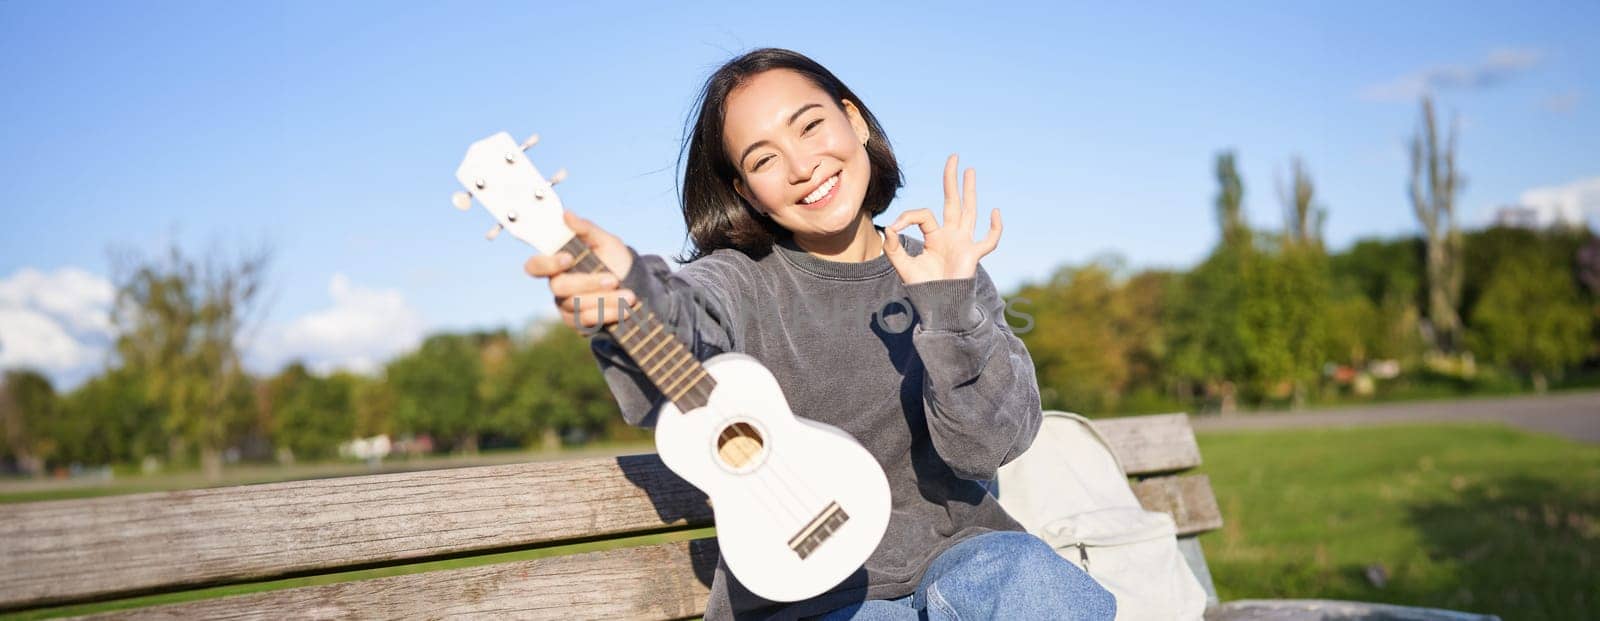 Cute smiling girl shows ok sign and her new ukulele, sits on bench in park, recommends musical instrument.